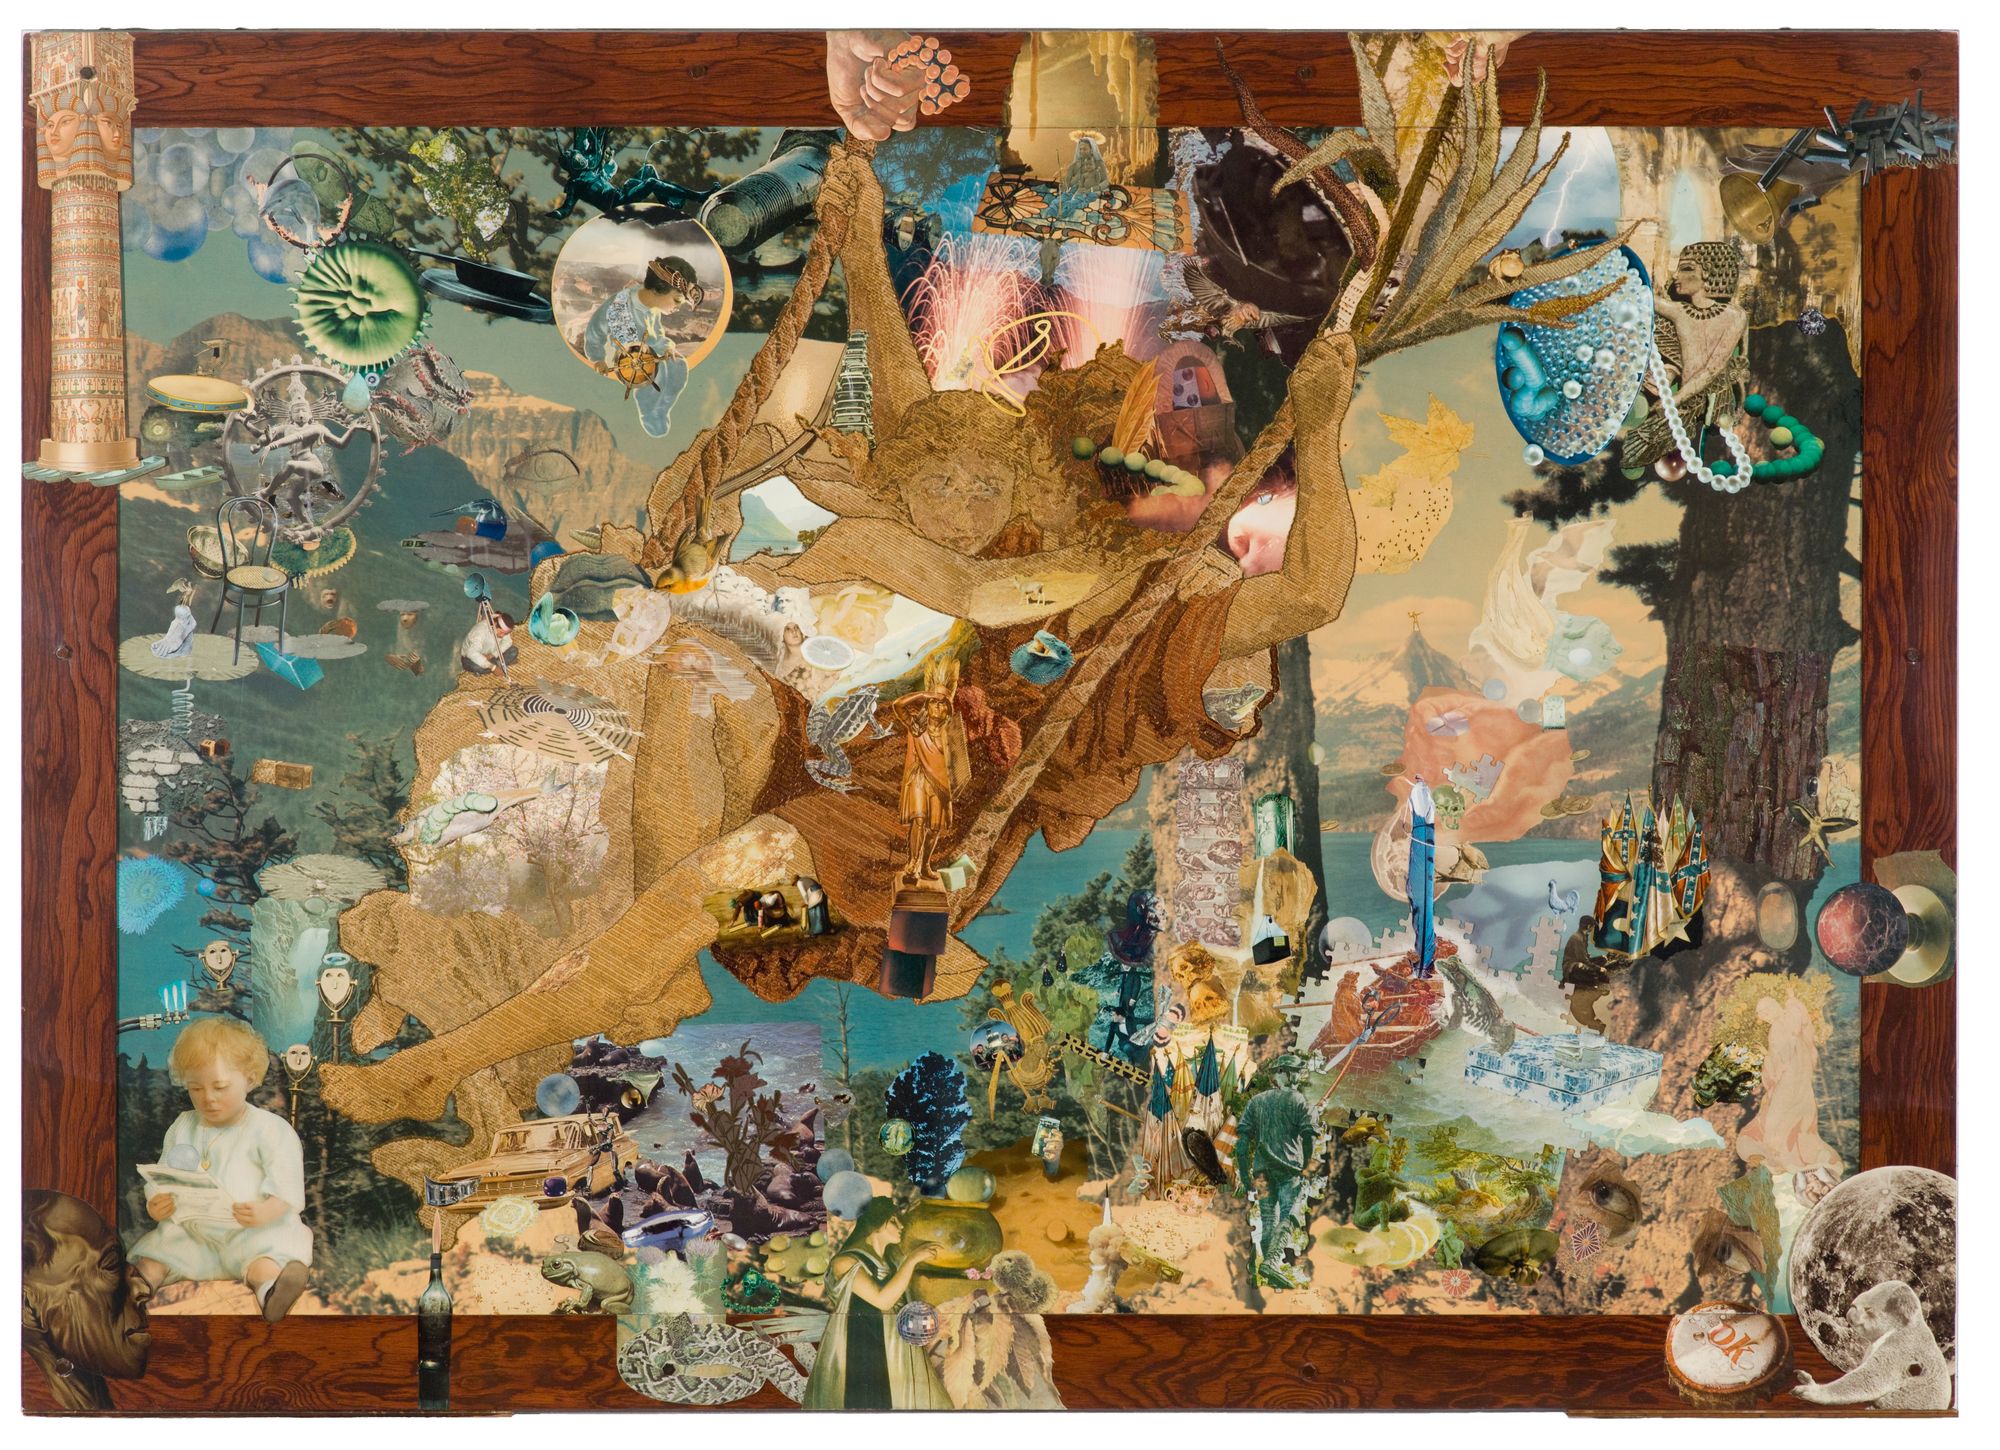 An ornate collaged tapestry with two figures kissing on a swing in the foreground.